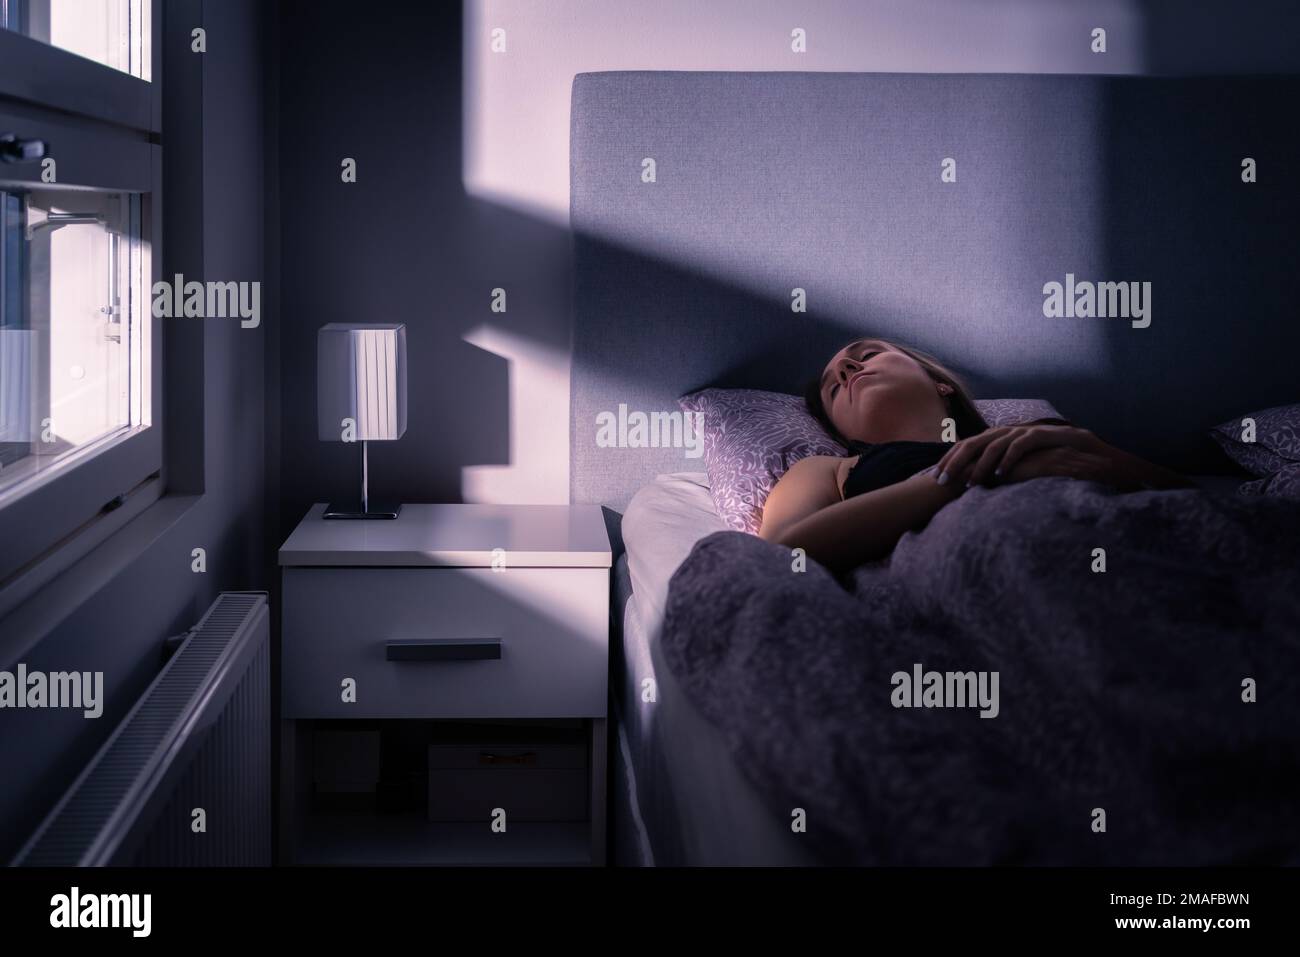 Sleeping woman in bed at night in dark bedroom. Person under blanket and cover. Person asleep, resting in cold room at home. Tired lady. Stock Photo